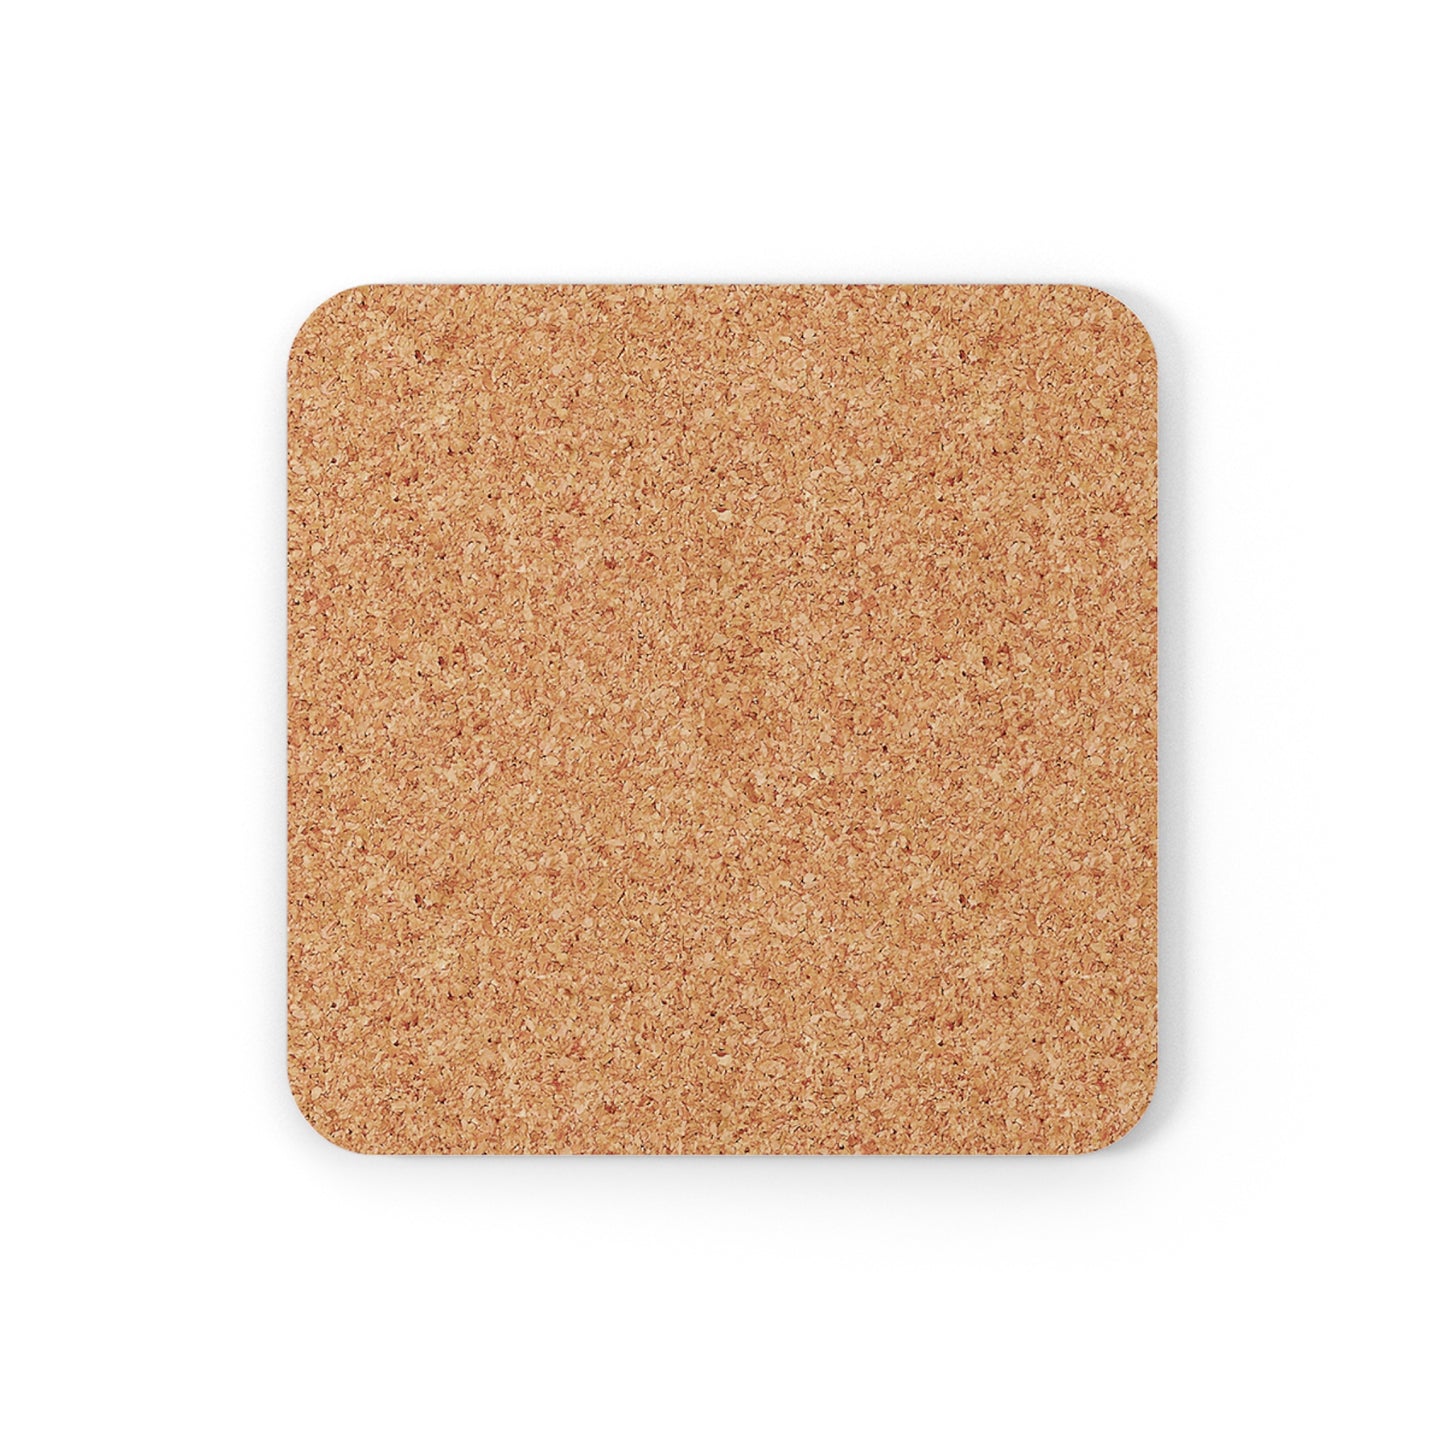 With Her Fists - Corkwood Coaster Set